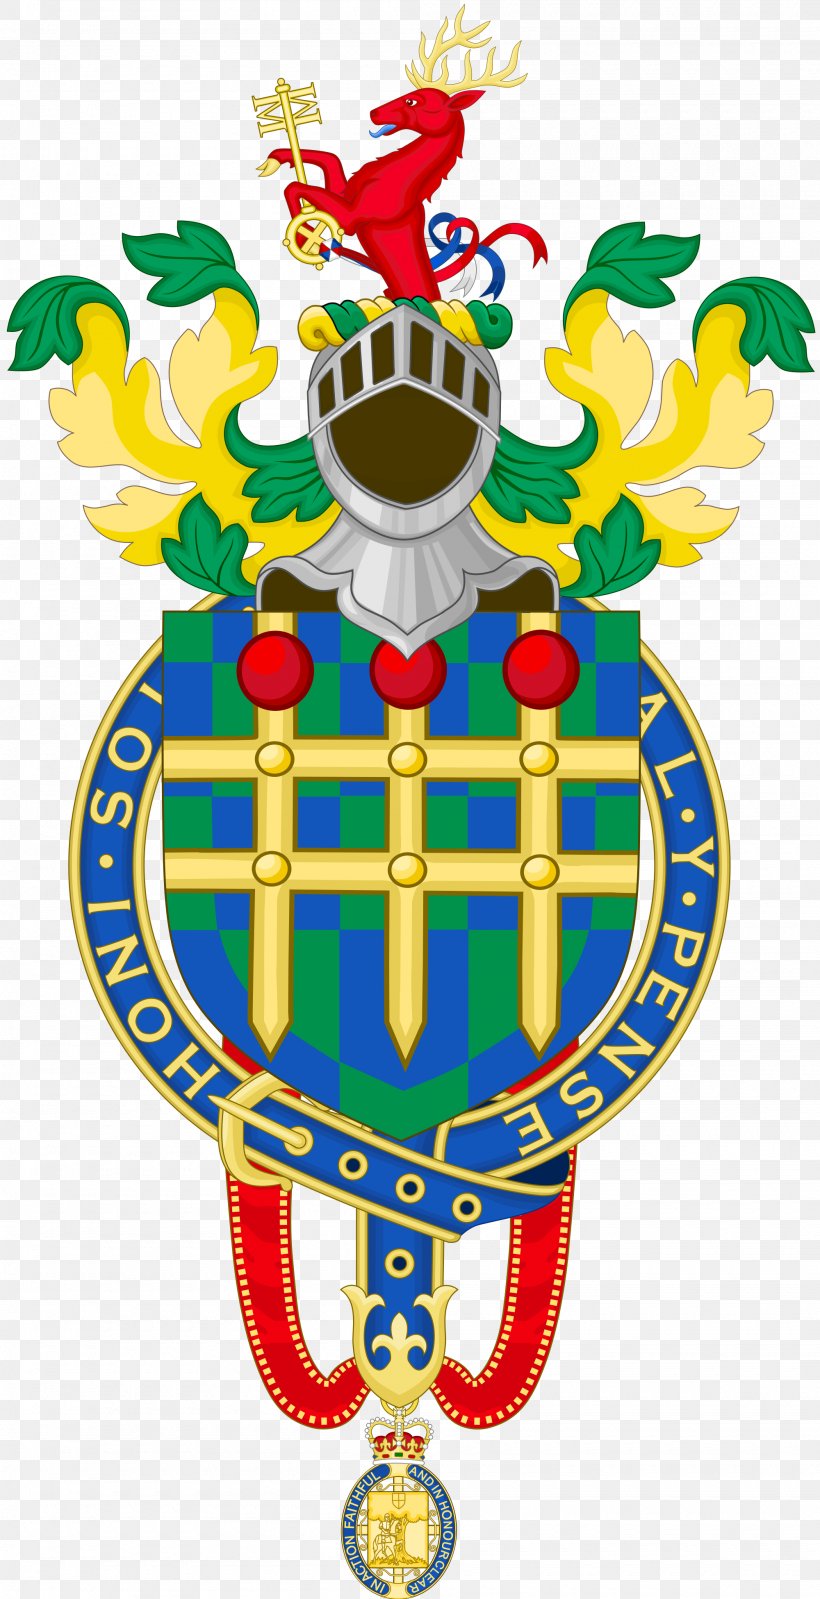 Order Of The Garter Royal Coat Of Arms Of The United Kingdom Prime Minister Of The United Kingdom, PNG, 2000x3902px, Order Of The Garter, Coat Of Arms, Crest, Garter Principal King Of Arms, Heraldry Download Free